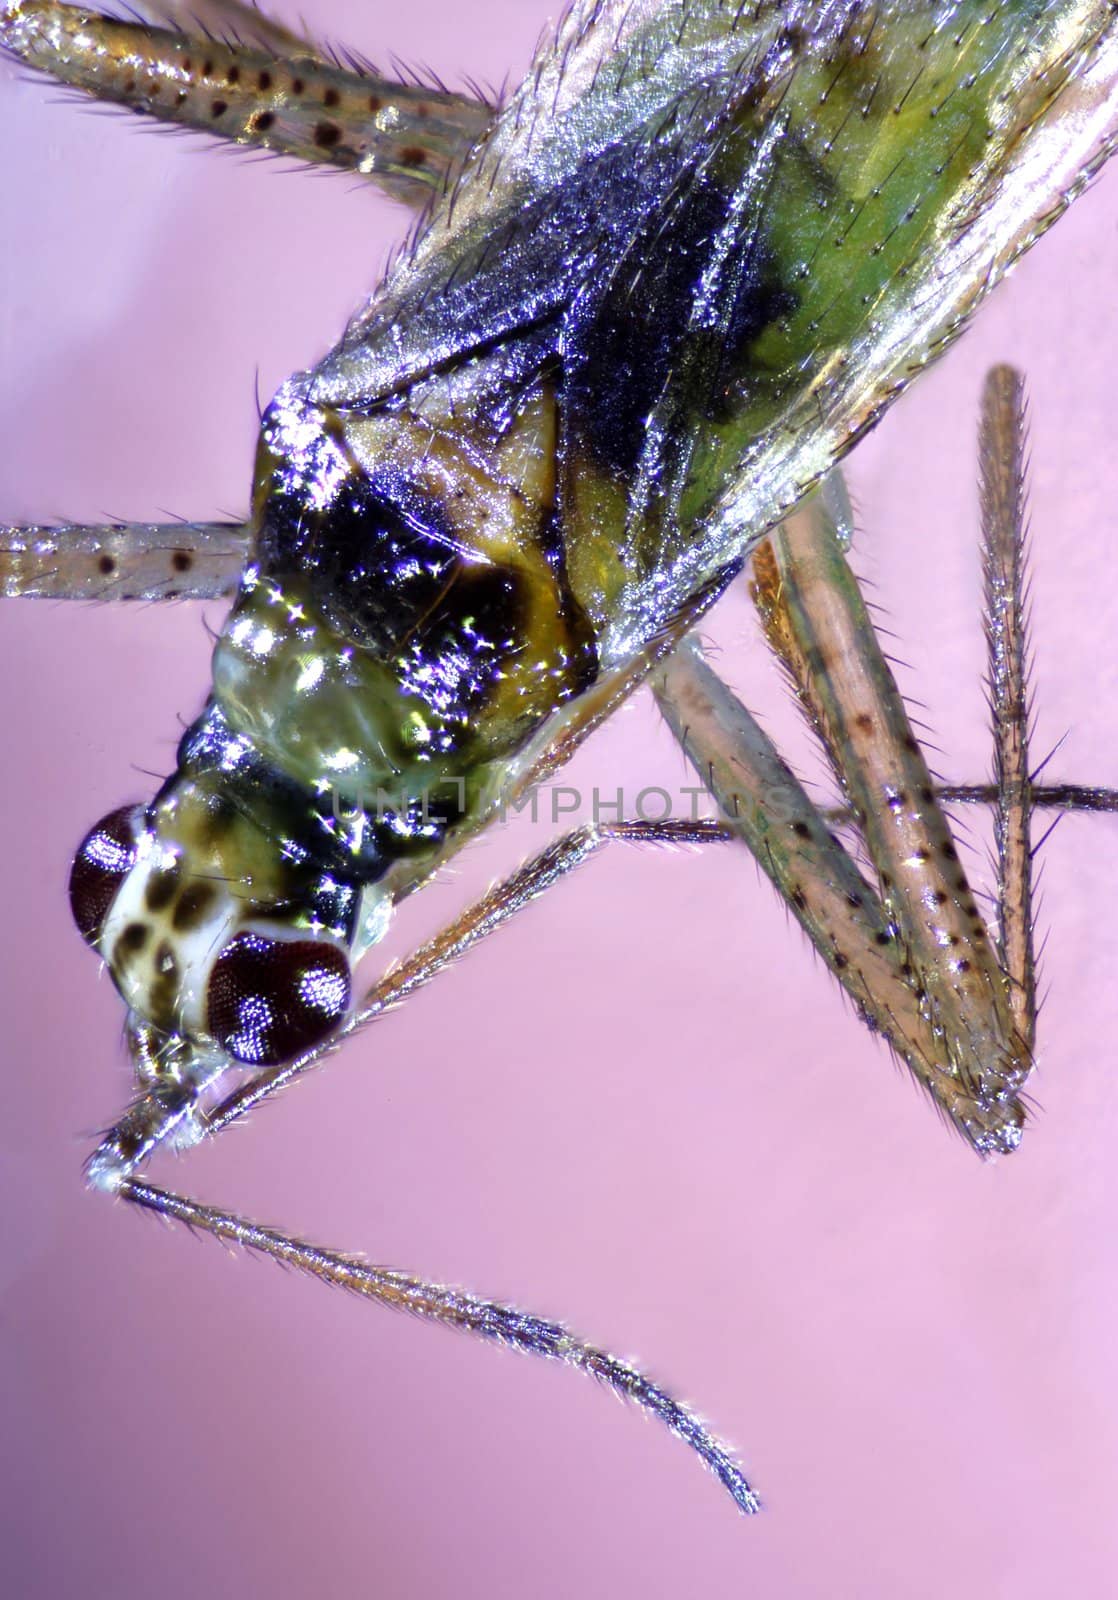 Micrographs of microscopic insects taken with a compound microscope at 100X.